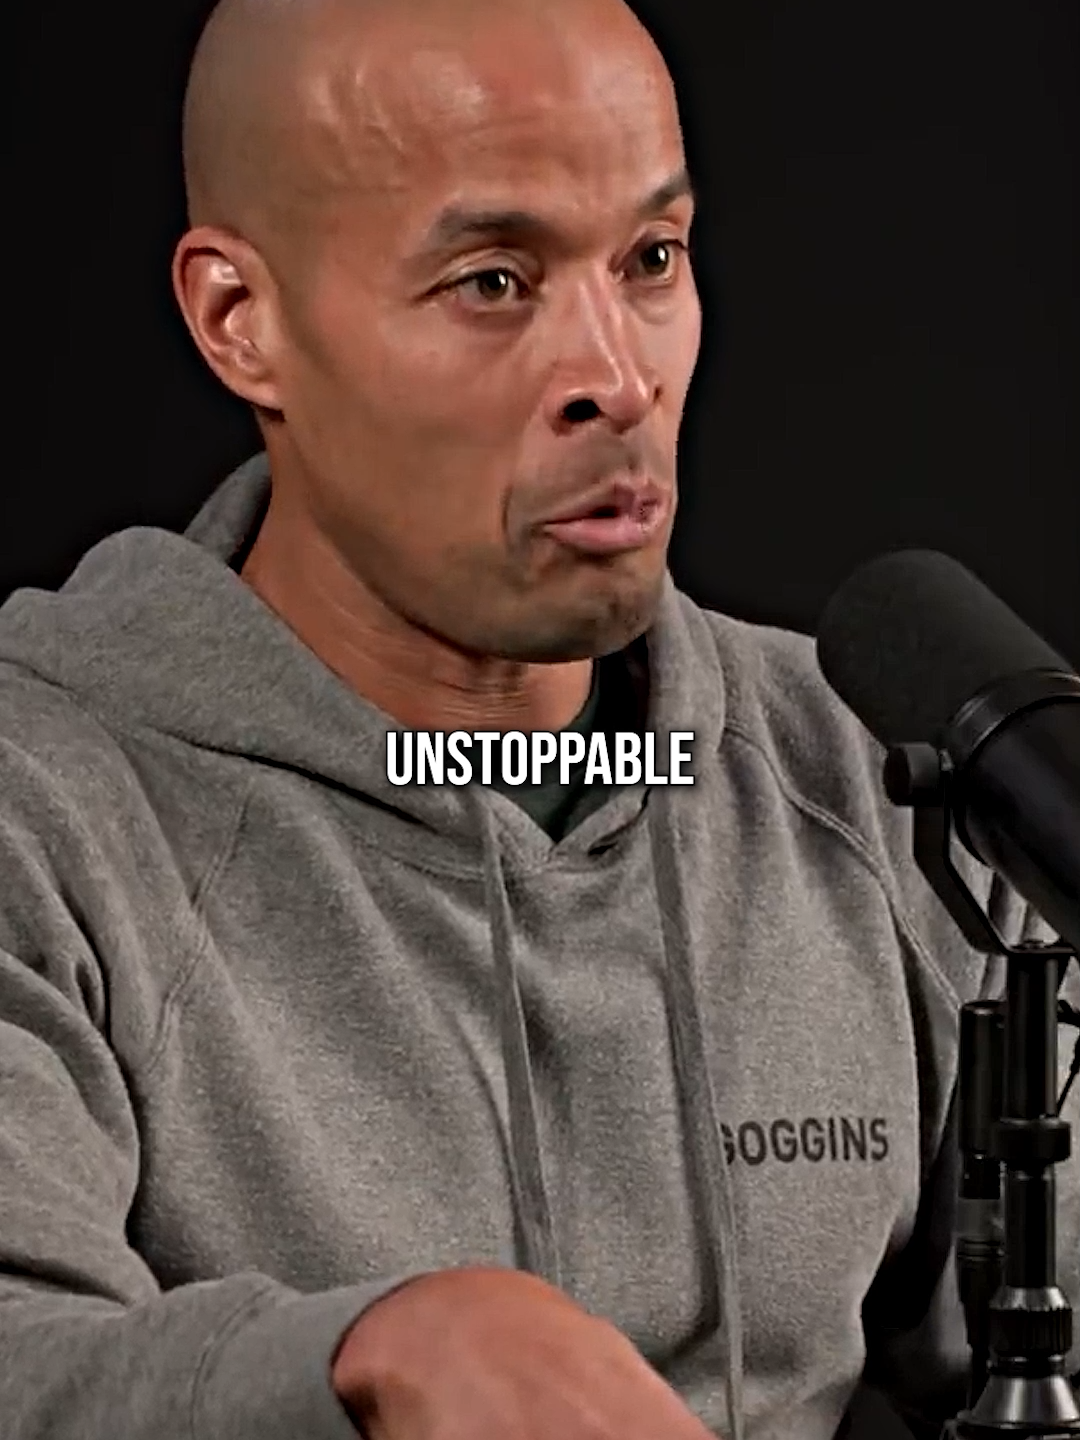 The Insane Potential Of Your Mind | David Goggins #davidgoggins #davidgogginsmotivation #davidgogginsmindset #hubermanlab #lifequotes #LifeAdvice